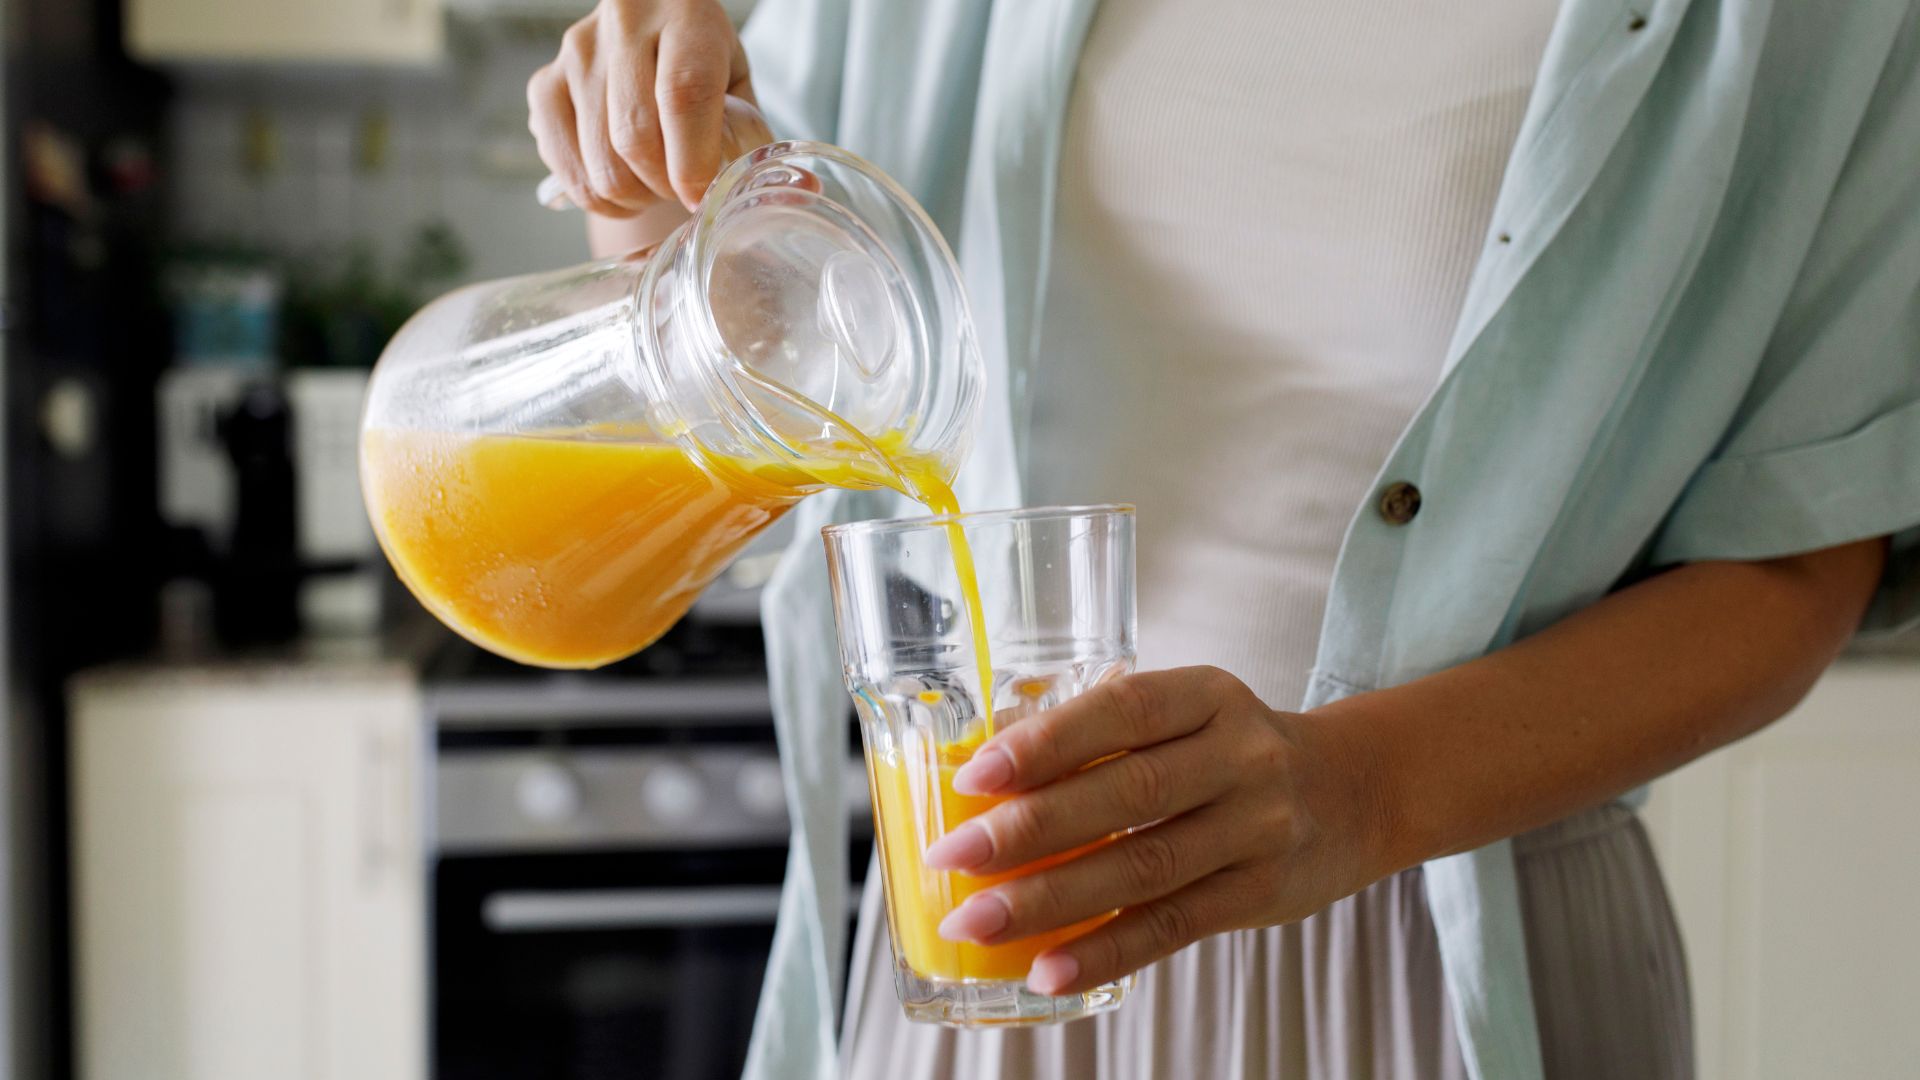 5 foods that cause bloating - woman pouring orange juice